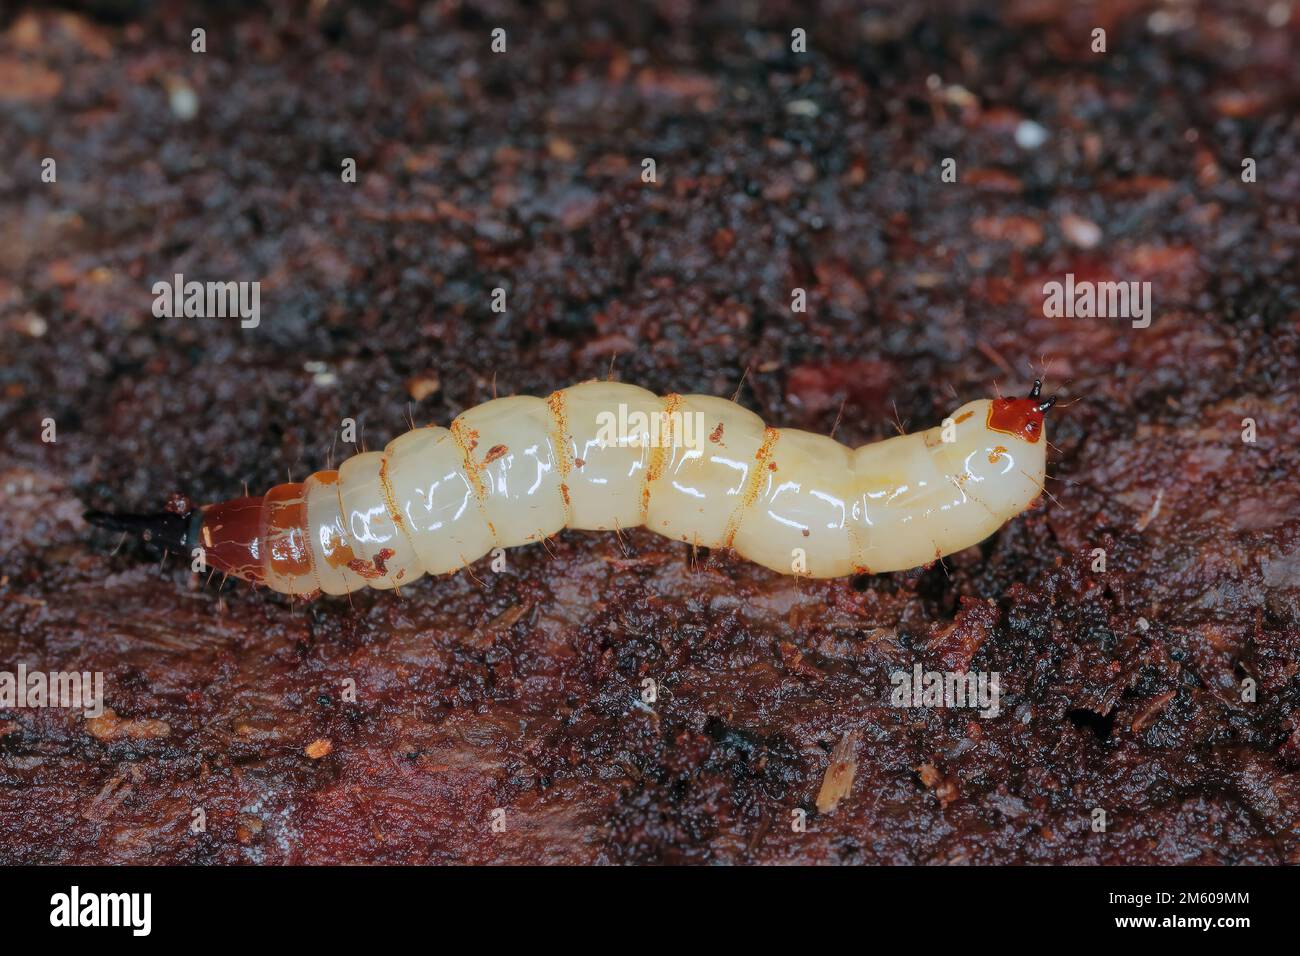 Awl fly larva on rotten wood (Xylophagus sp). Stock Photo